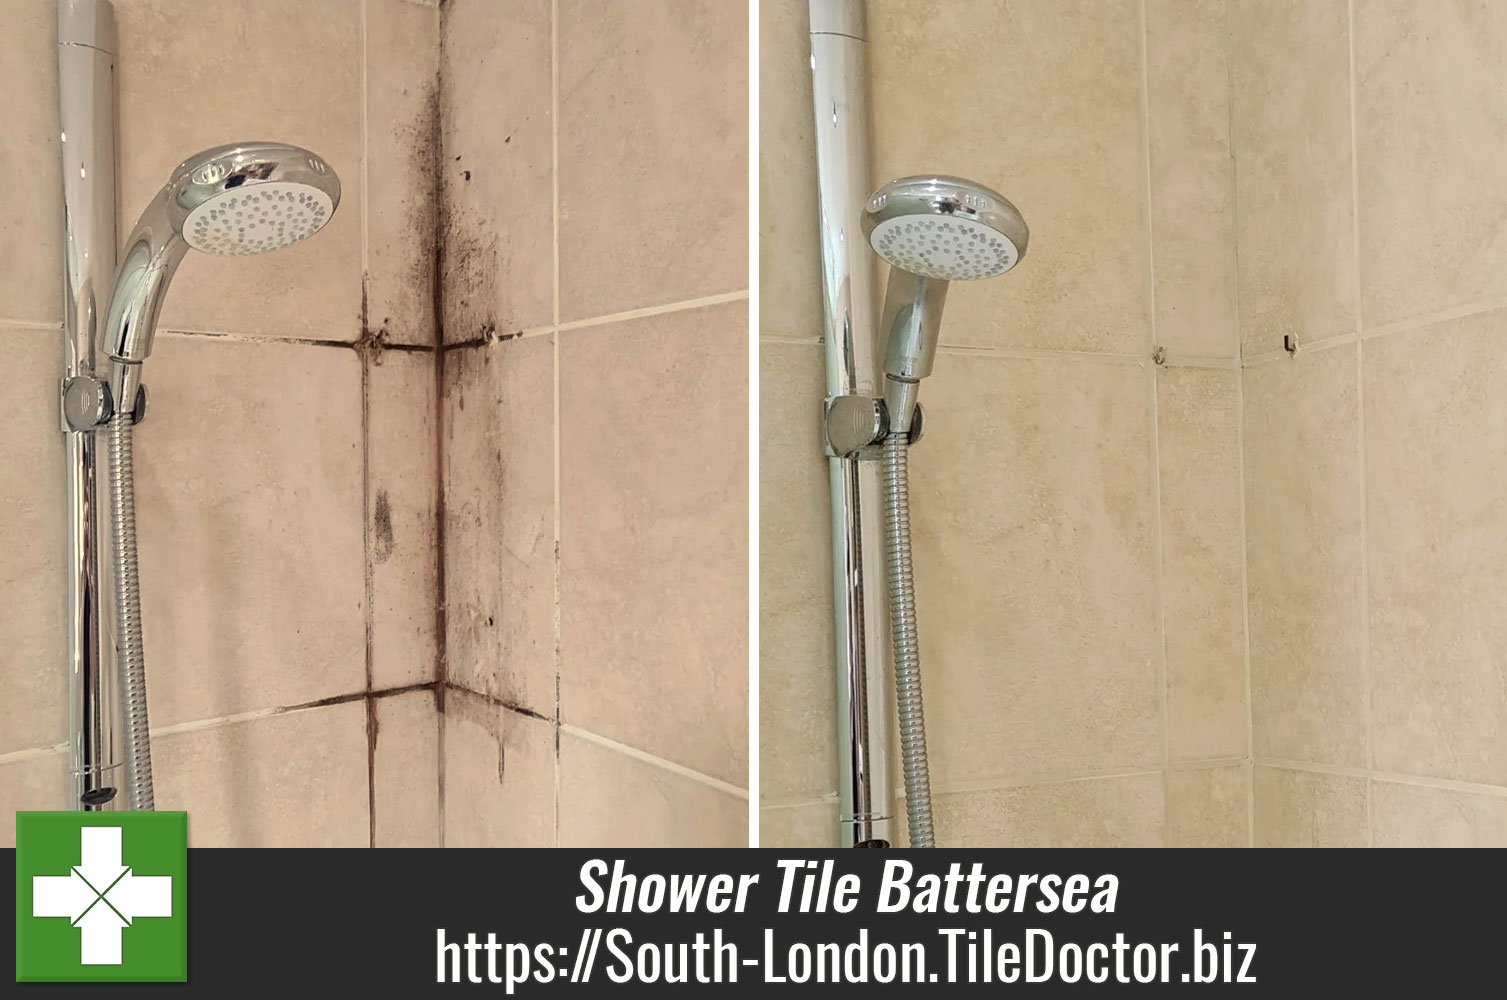 Tile Doctor Grout Clean-up used to Renovate a Gruby Shower Cubicle in Battersea London